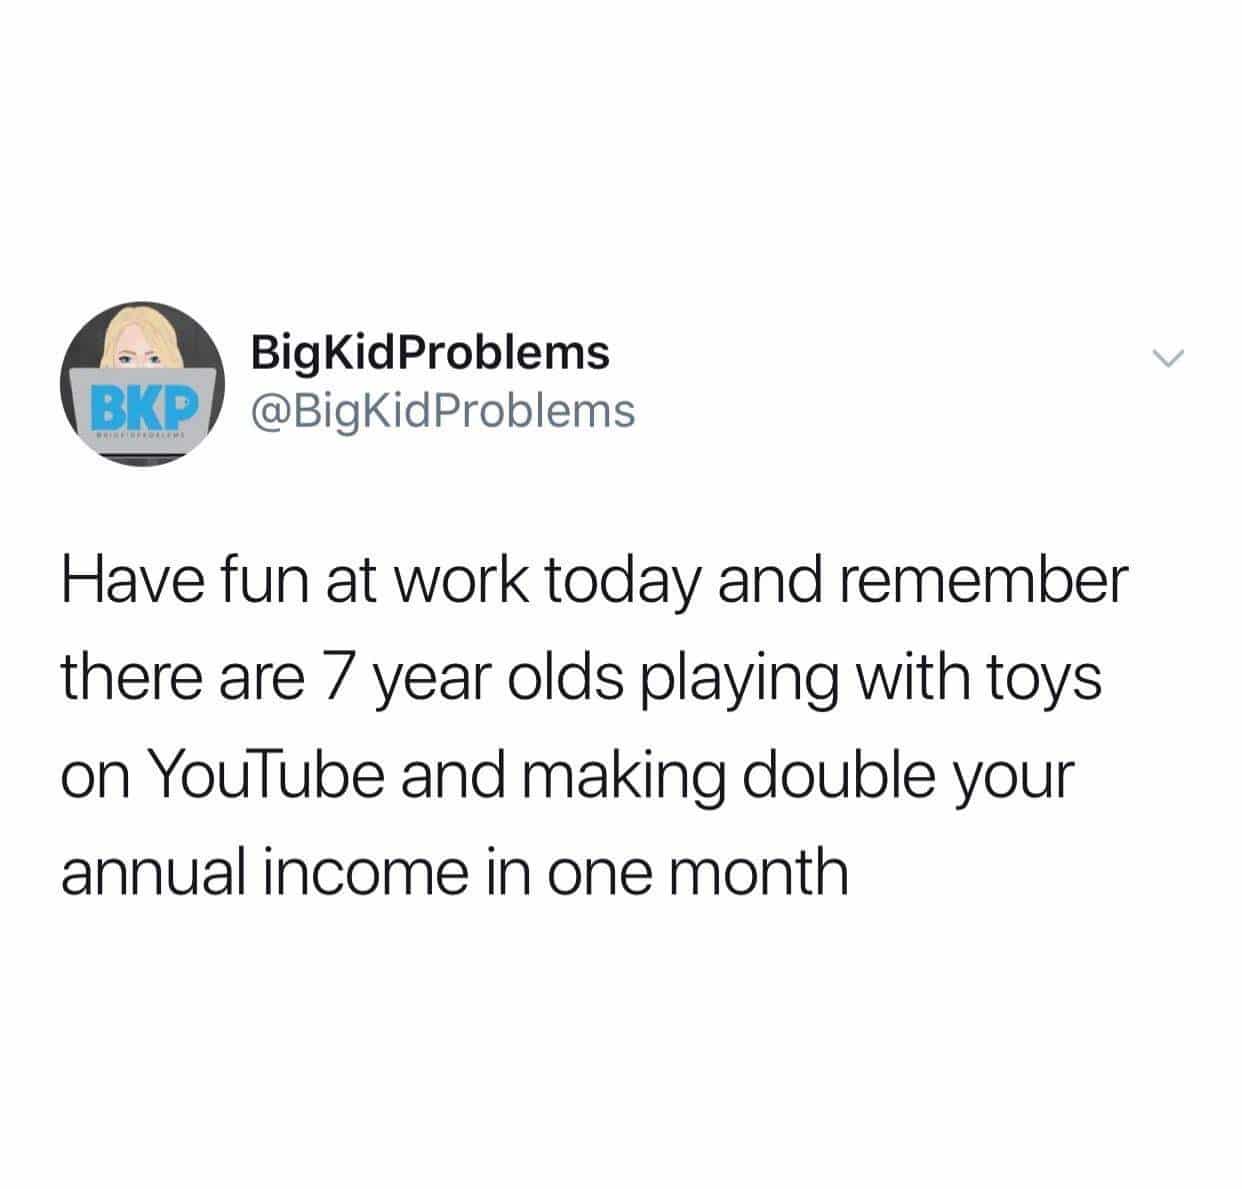 depression depression-memes depression text: BigKidProbIems CIP @BigKidProblems Have fun at work today and remember there are 7 year olds playing with toys on YouTube and making double your annual income in one month 